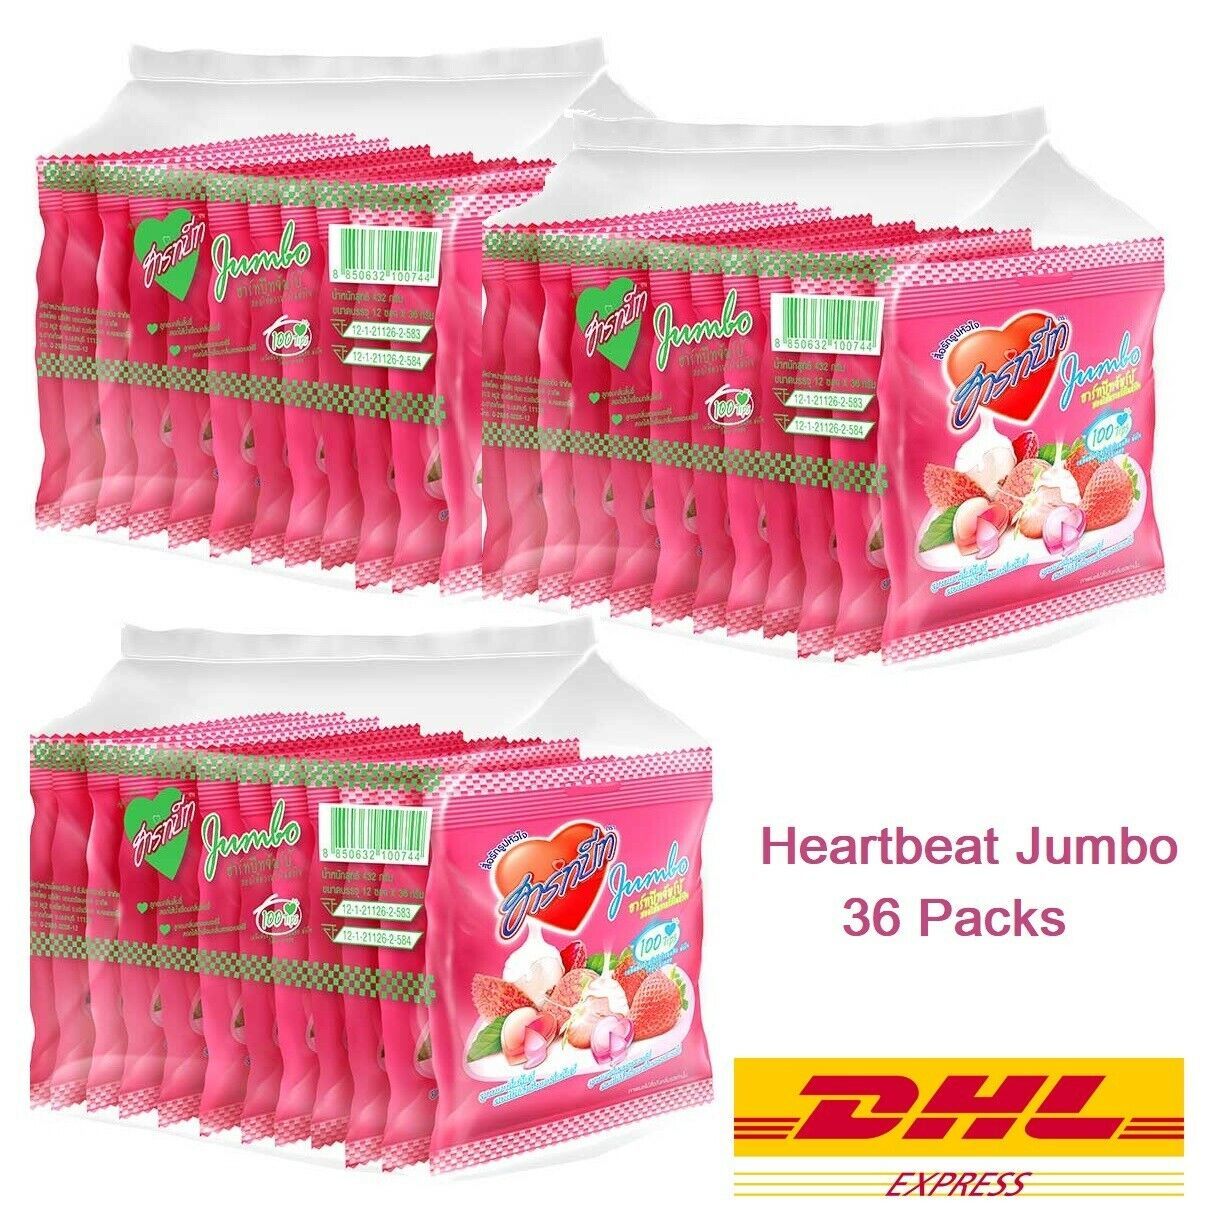 36 x Heartbeat Jumbo Candy Strawberry and Lychee Flavour 8 Tablets/Bag - $57.36